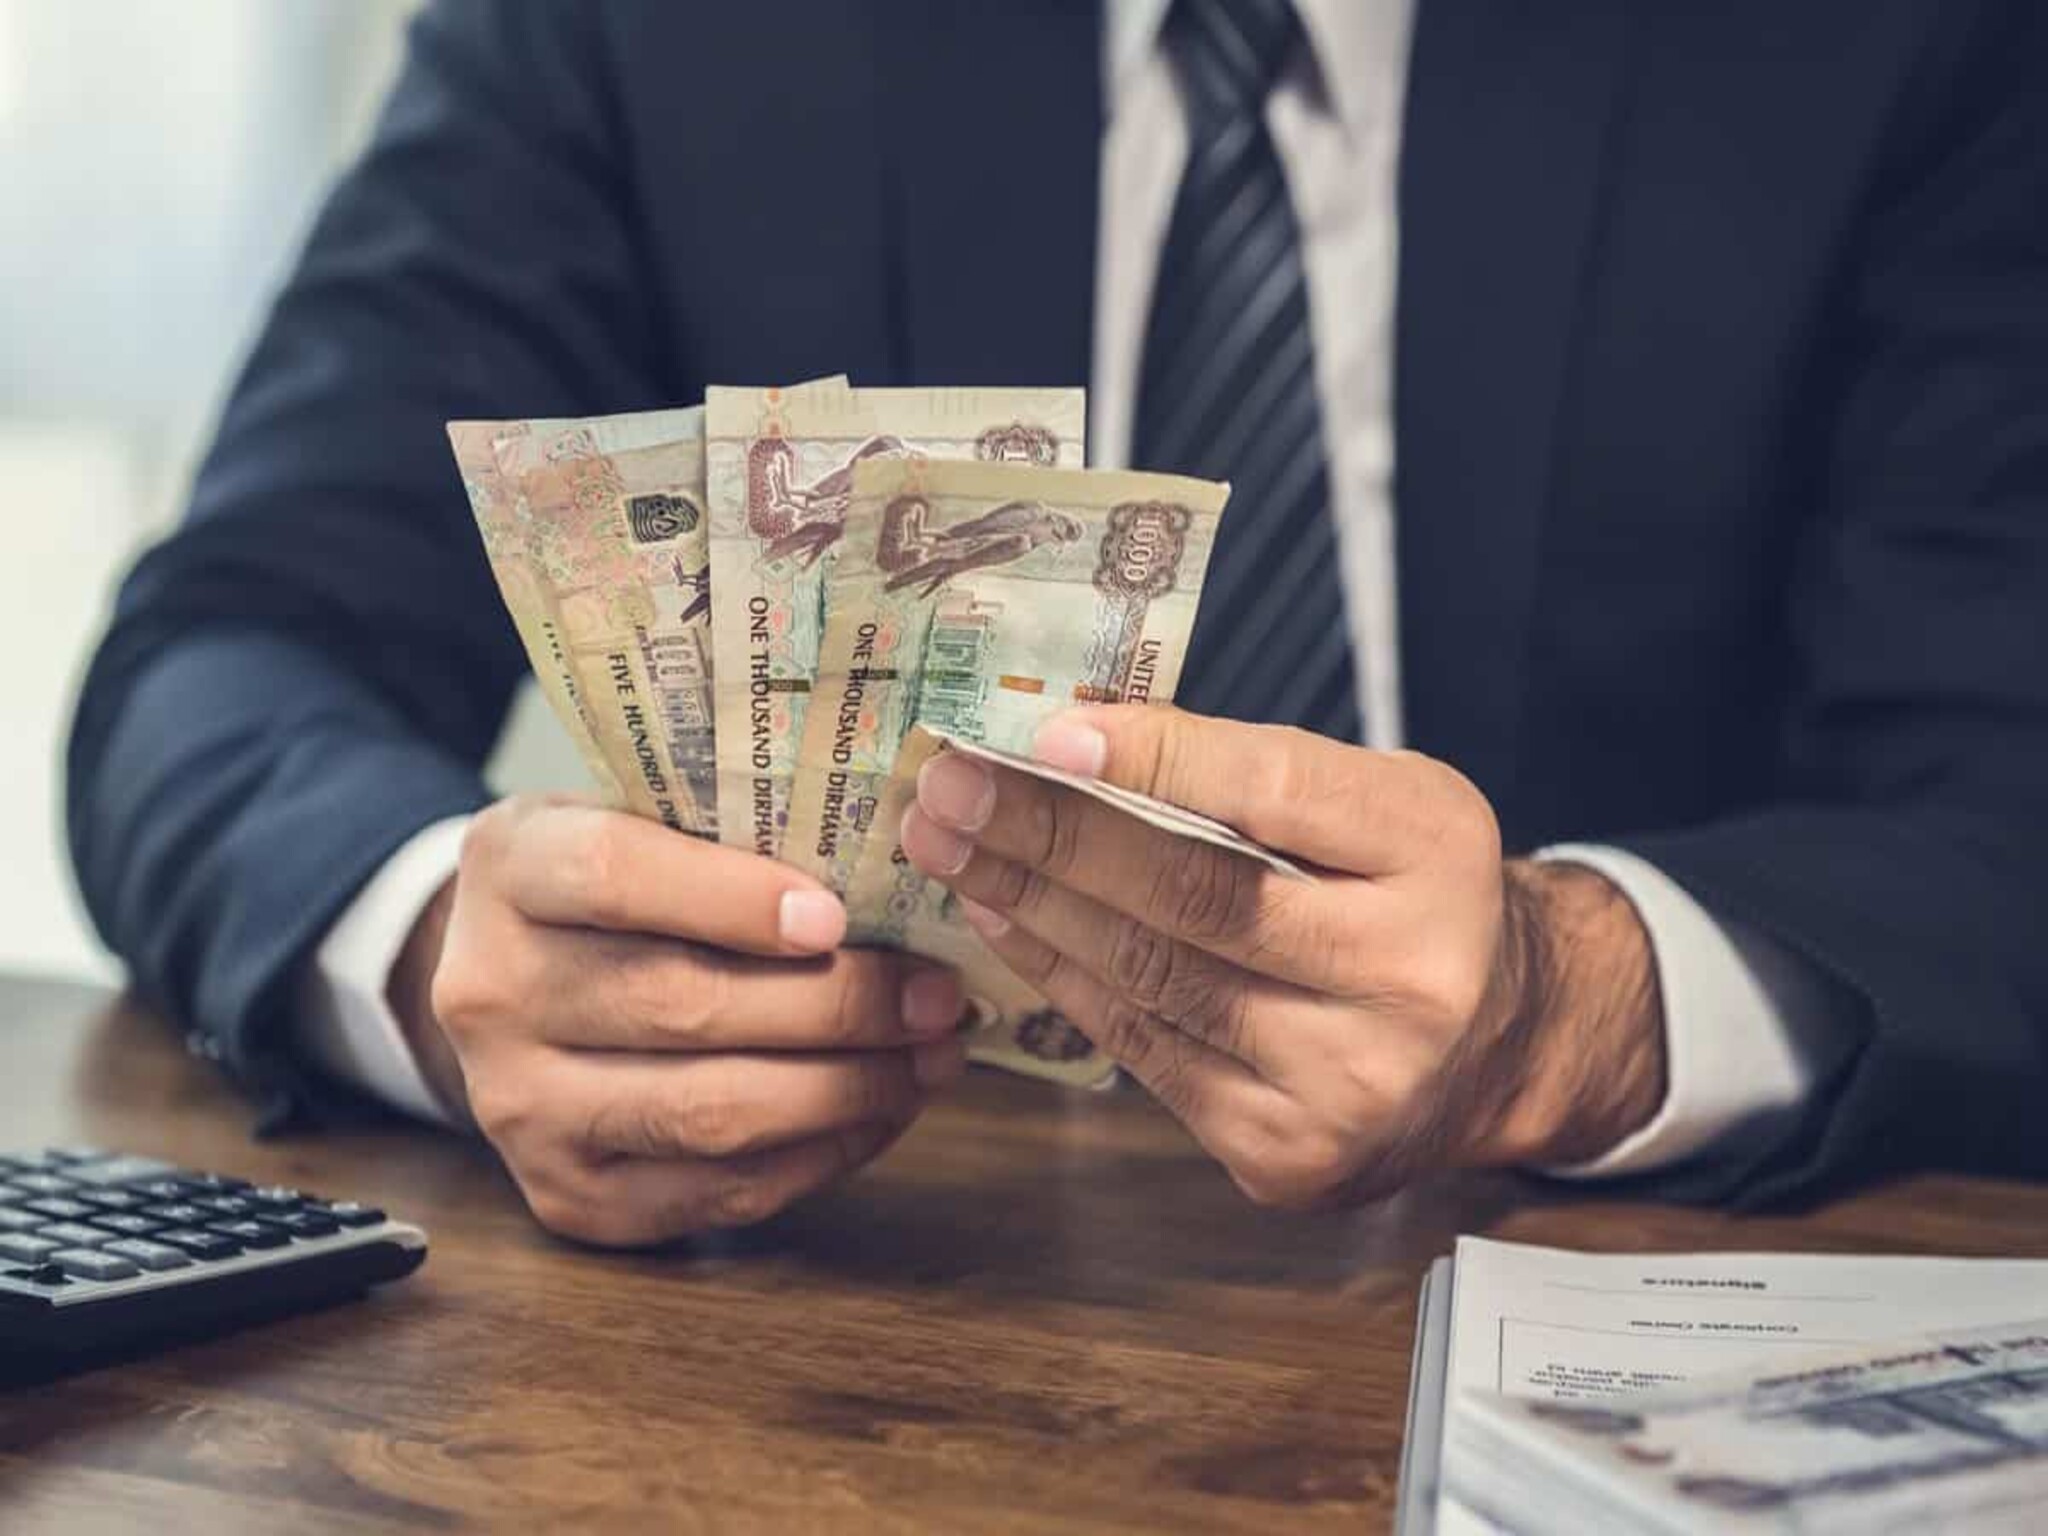 The average monthly salary for professionals in the UAE reaches 37 thousand dirhams